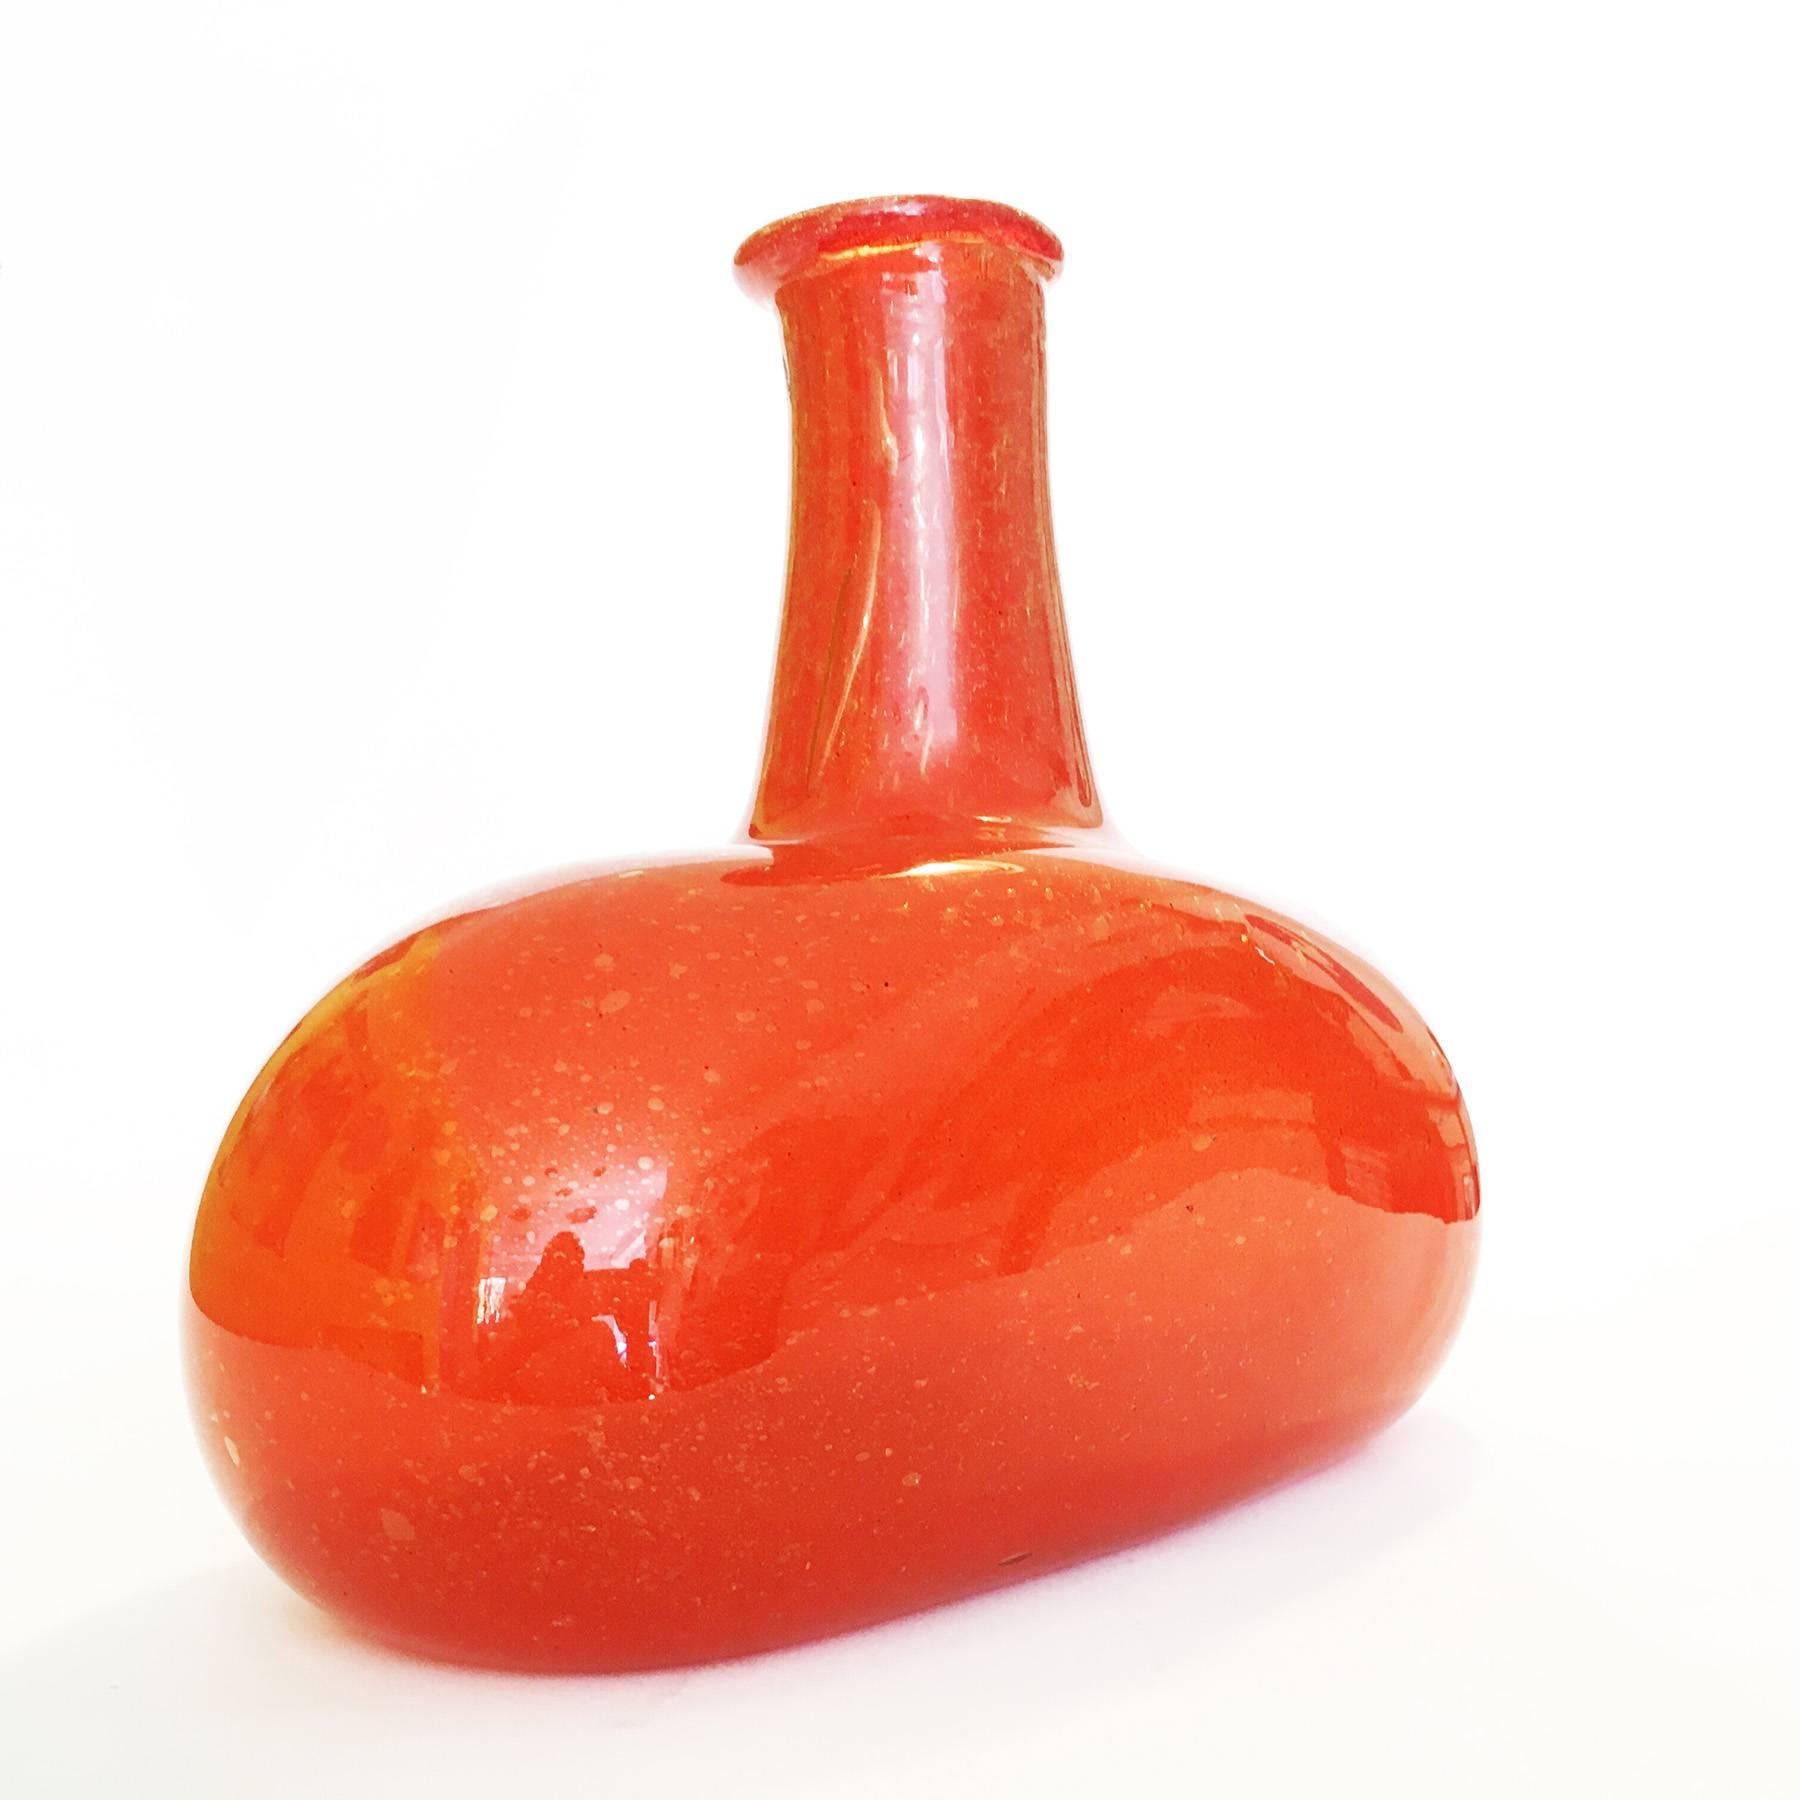 Big studioglass-vase from the 1960s. The vase is mouth blown and consists of thick orange colored glass with tiny bubbles and golden particles. The bottle shape is slightly amorph, which gives the piece a special touch. The vase is unsigned.